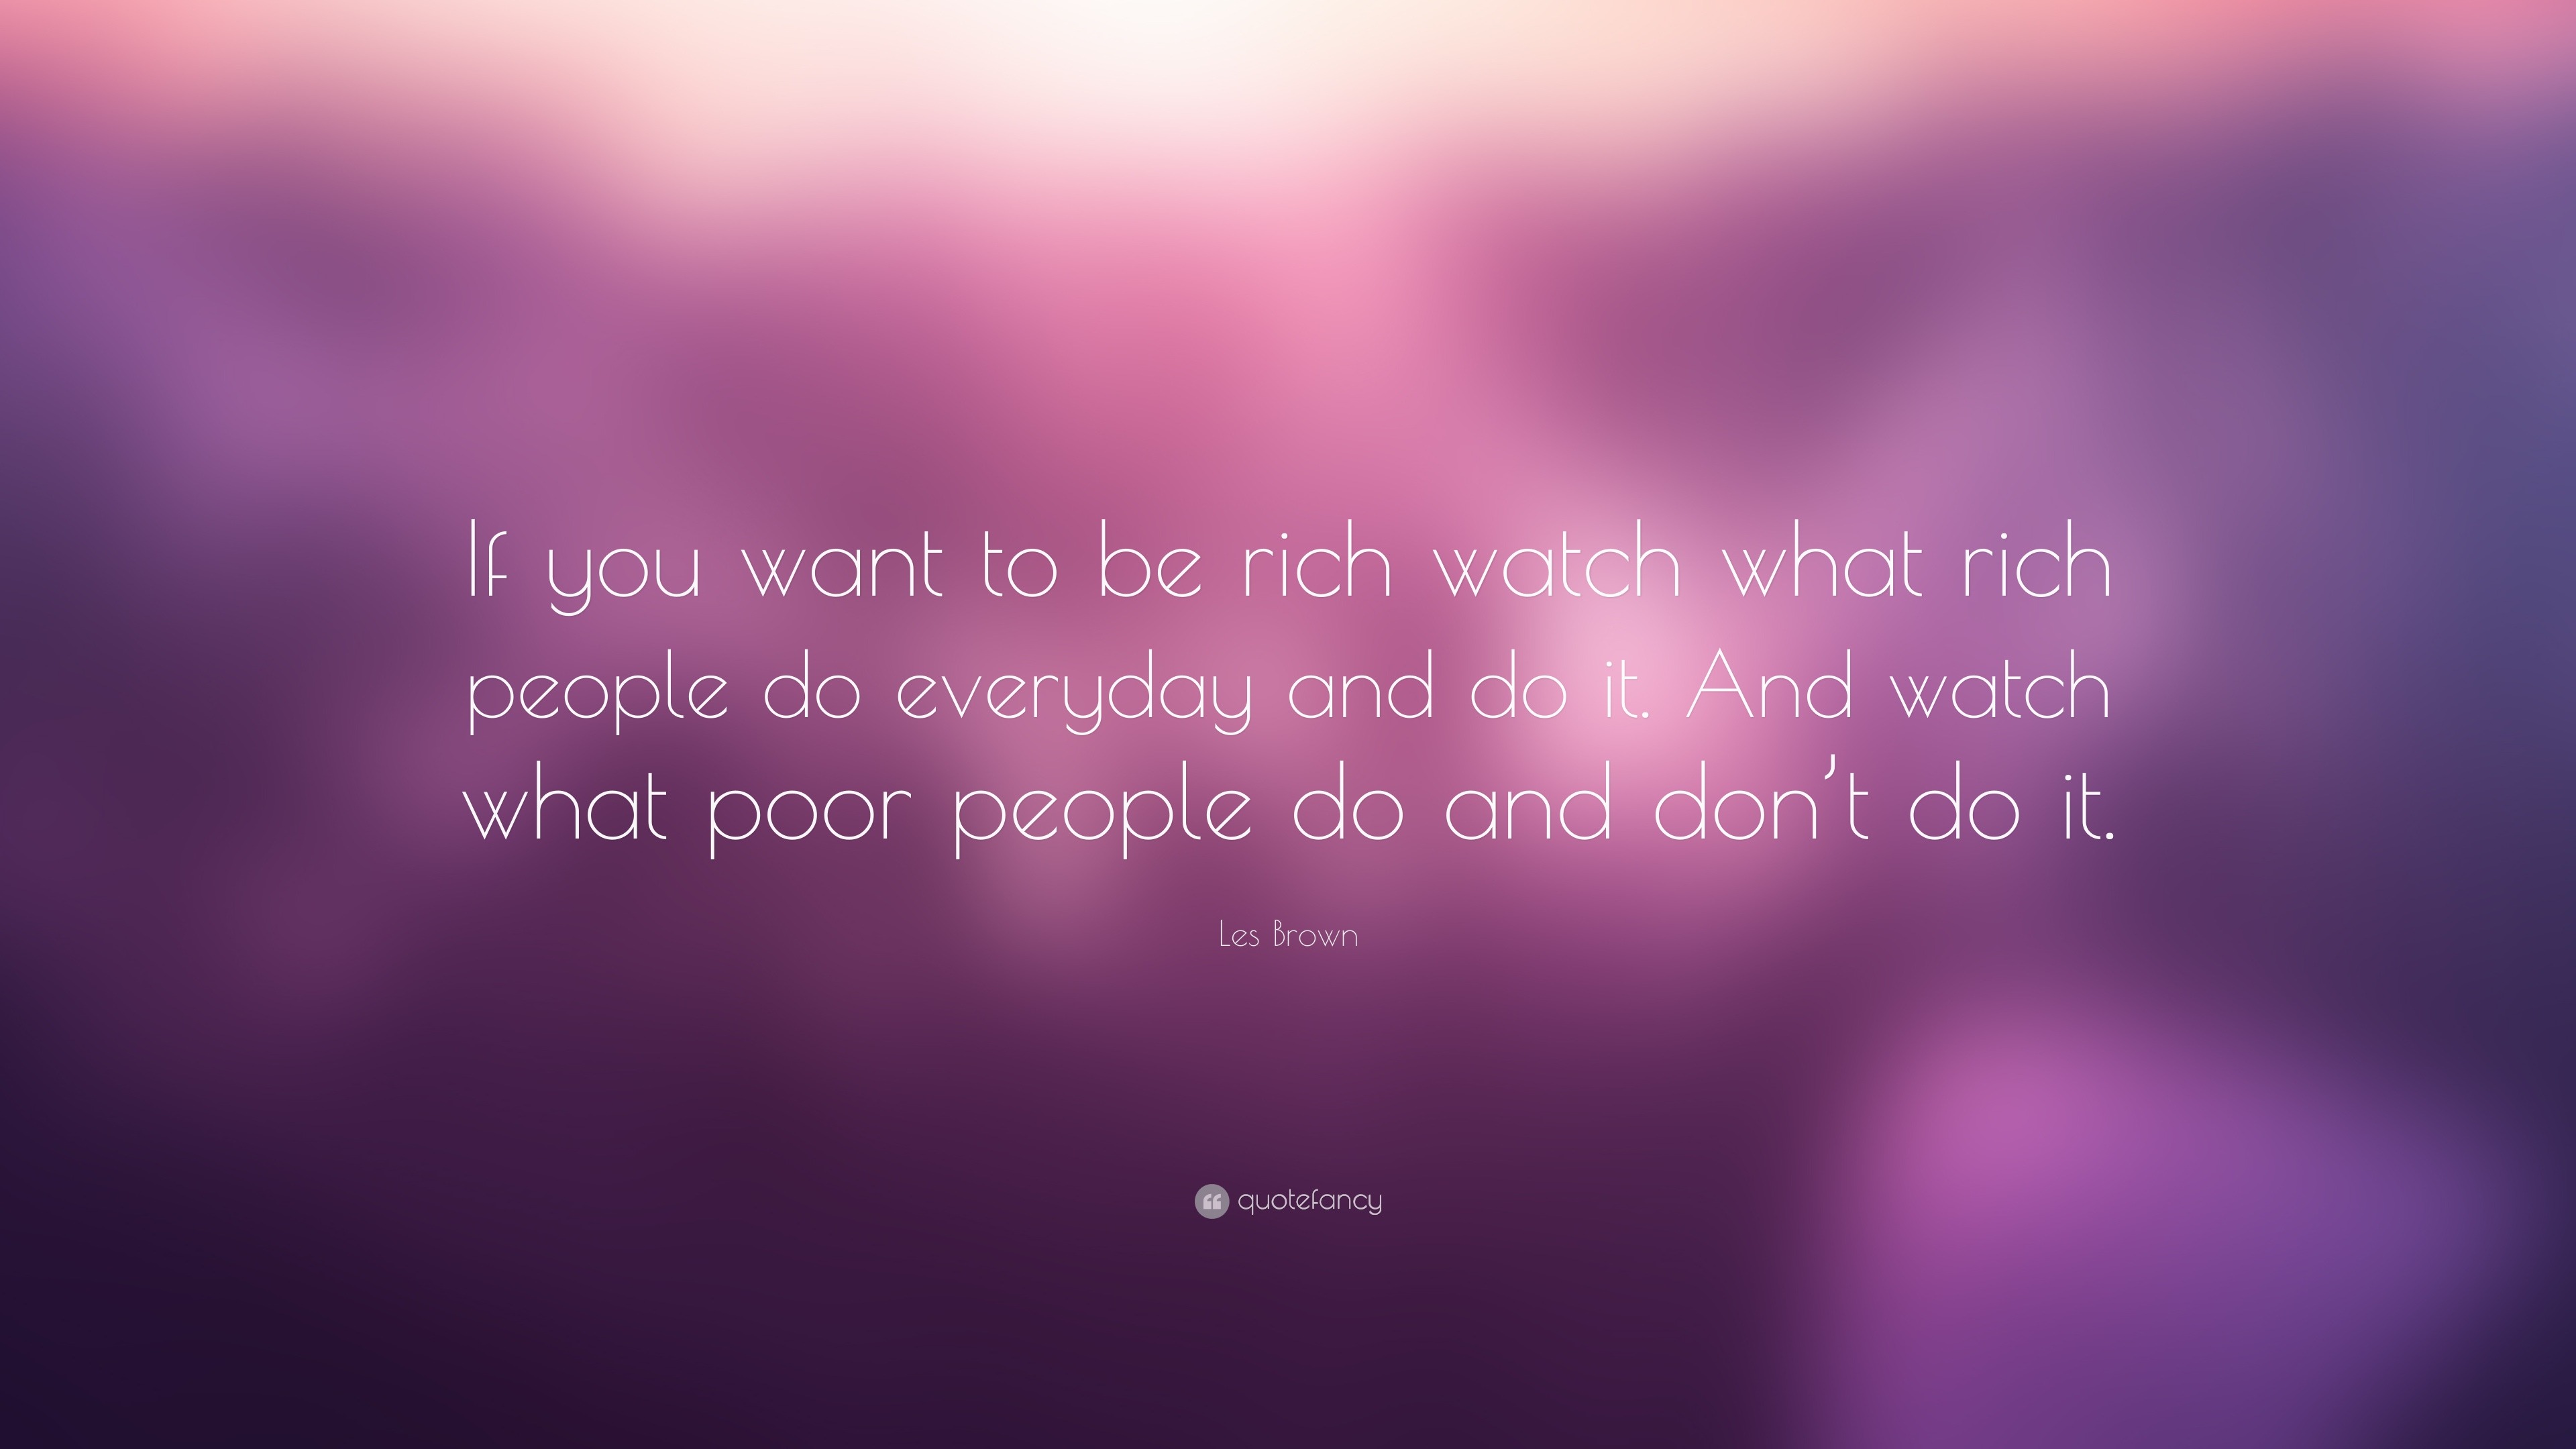 Les Brown Quote: “If you want to be rich watch what rich people do ...